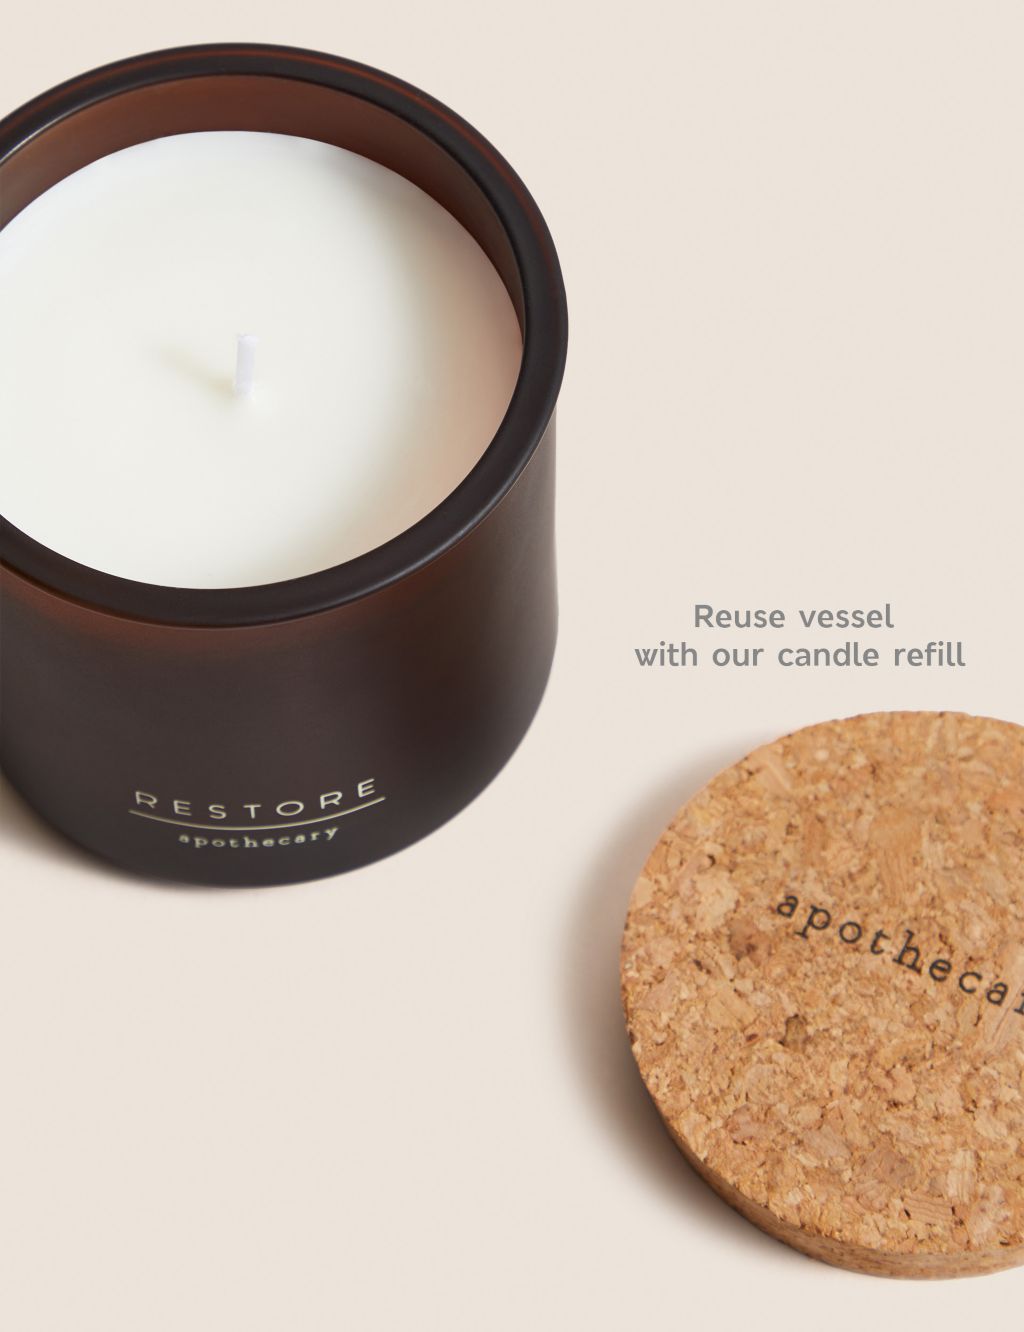 Restore Refillable Candle image 4